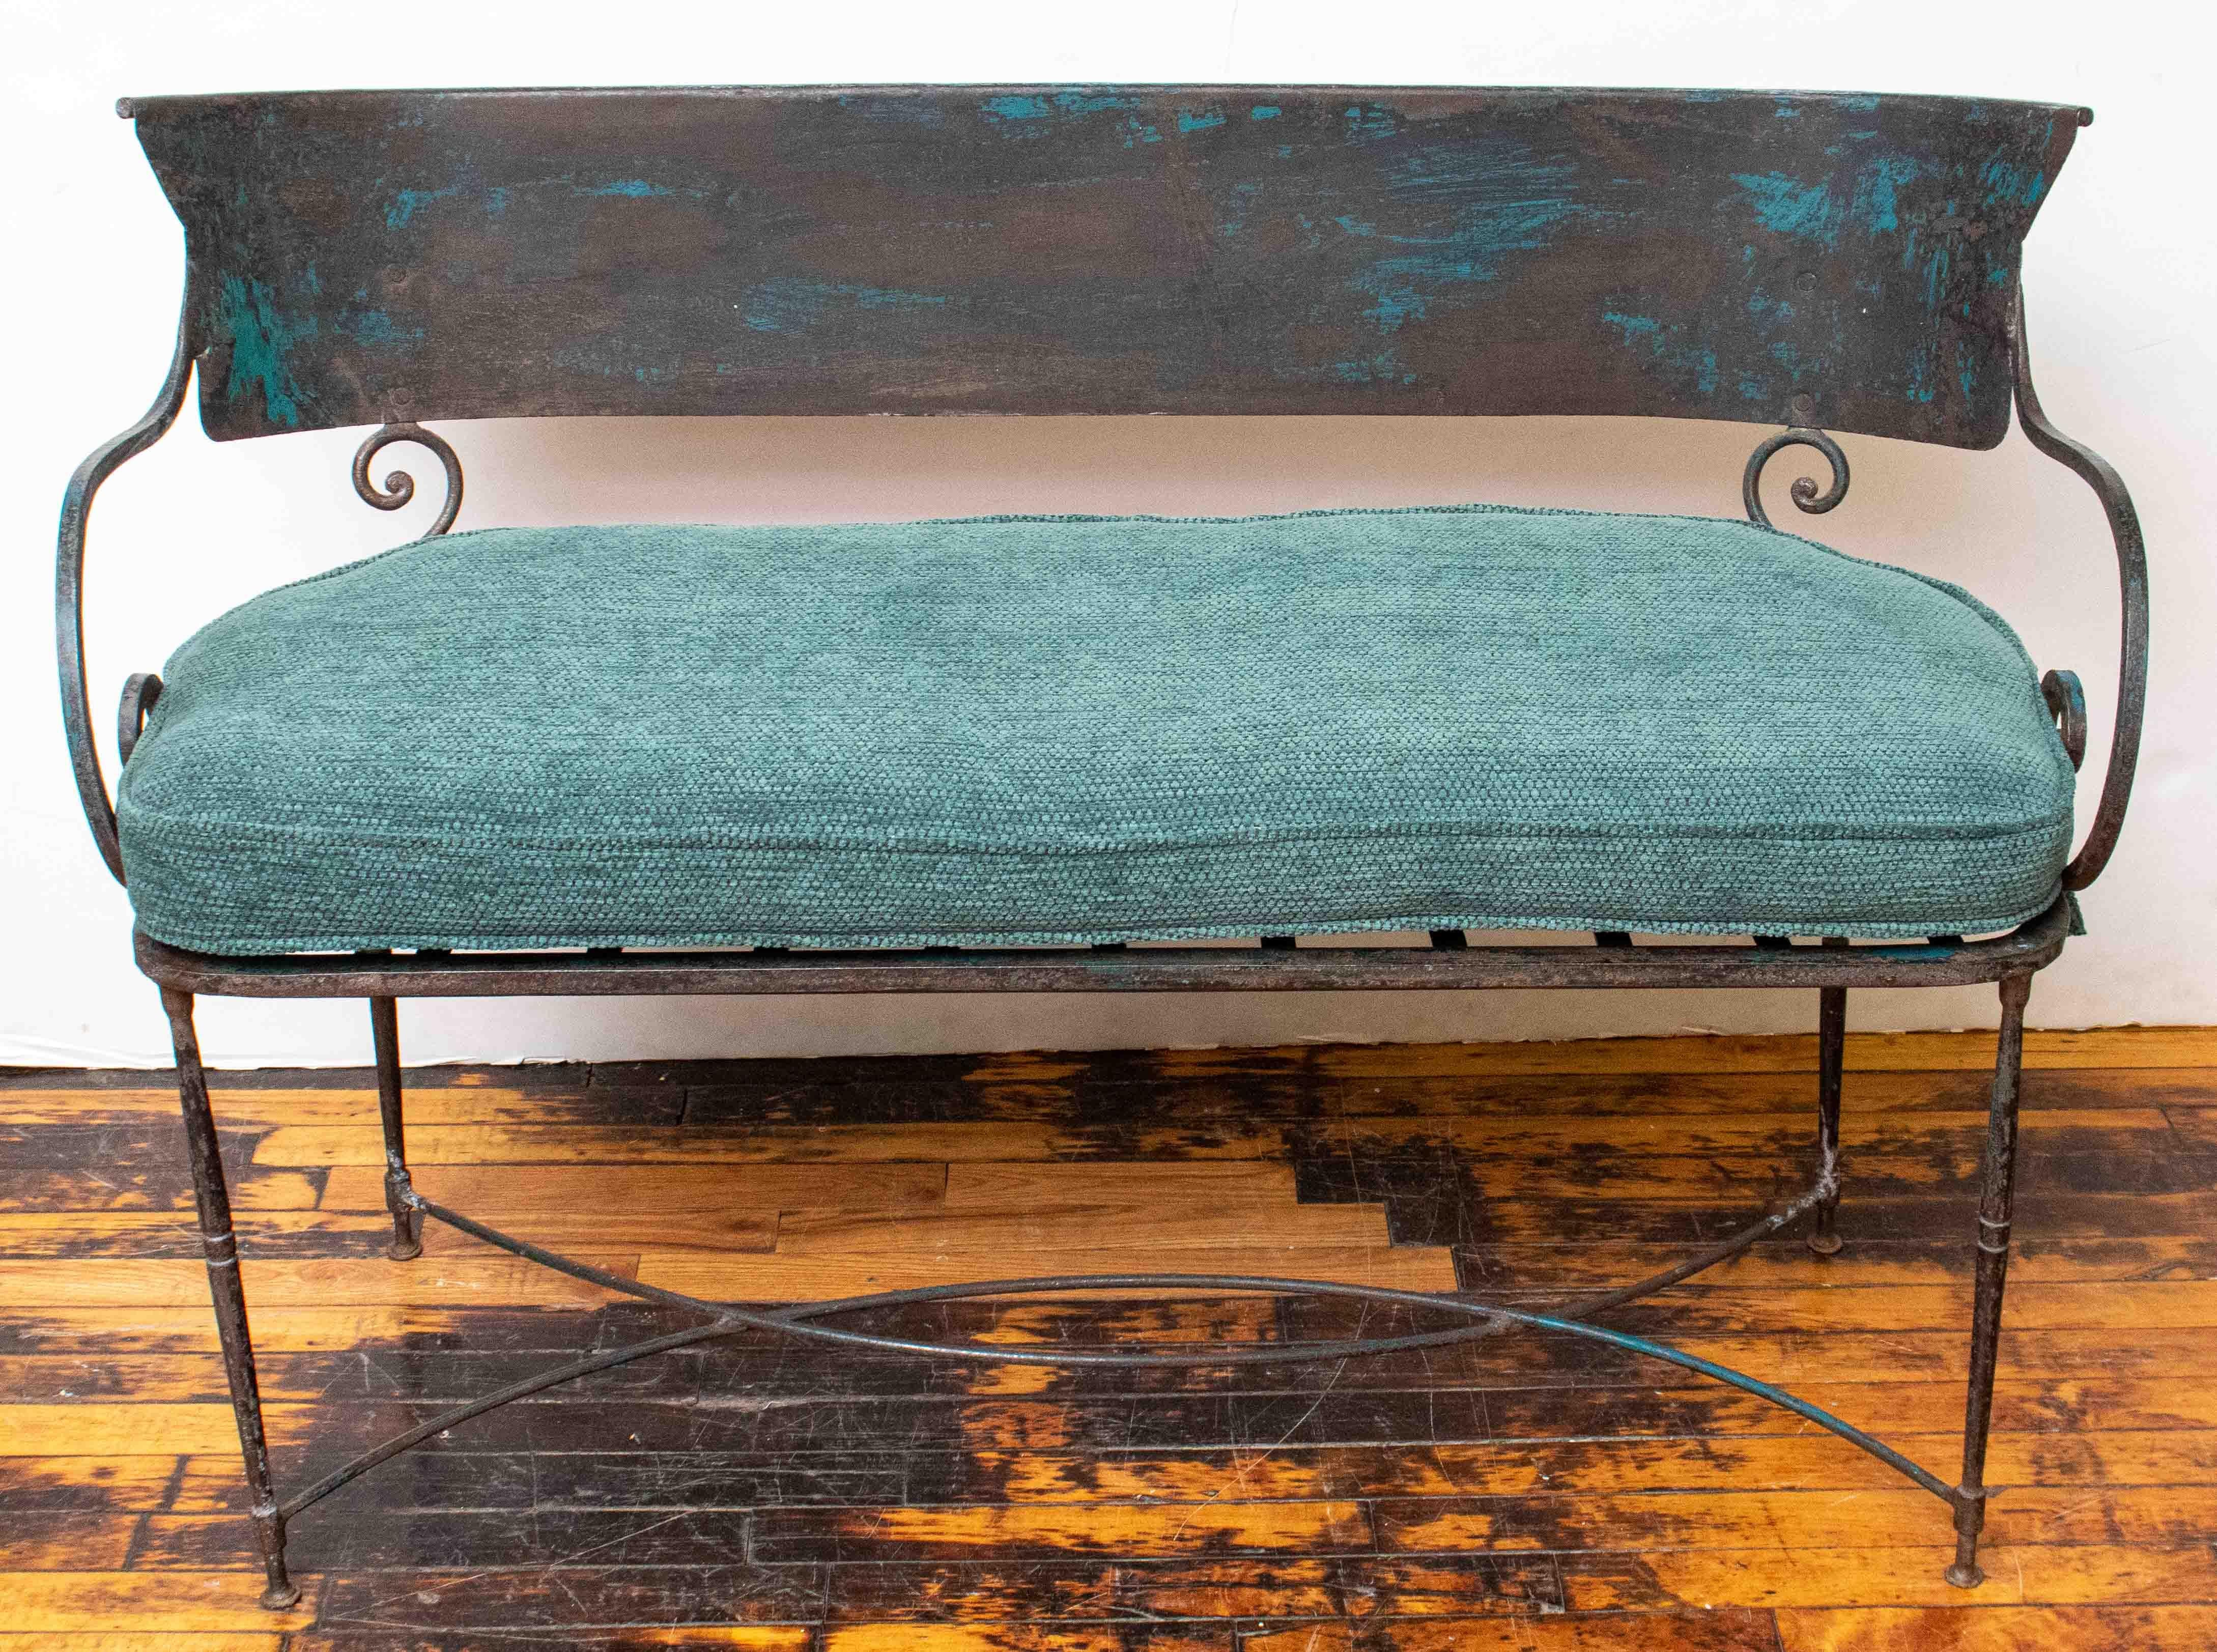 Beautiful iron garden settee with traces of original turquoise paint on the metal. A custom handmade cushion has been added that is upholstered in a deep blue-green chenille. There are metal straps under the cushion. Made in France - needle point